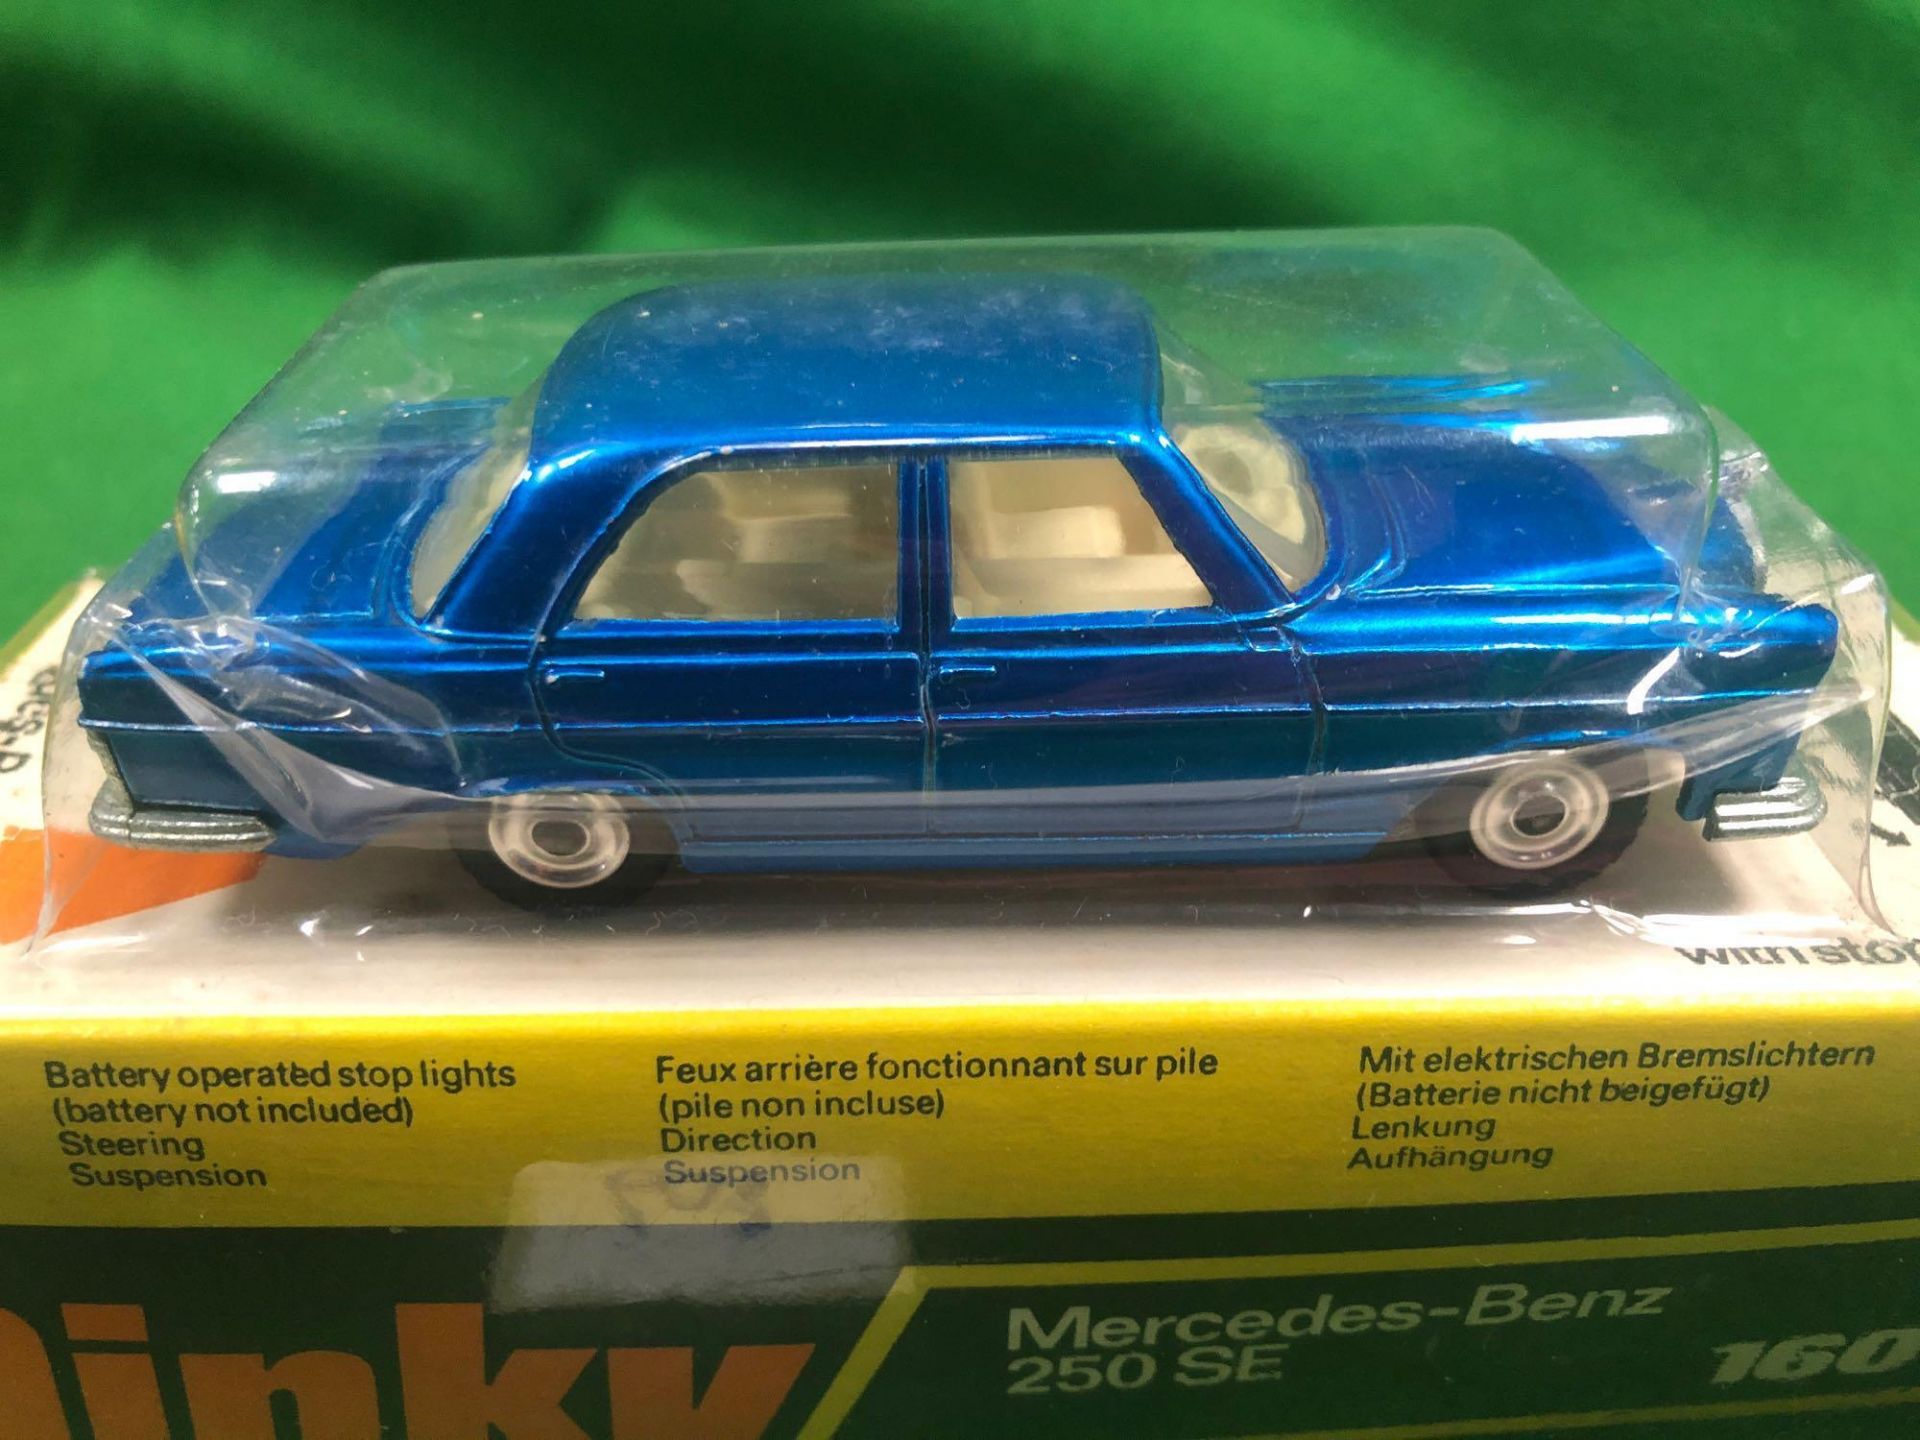 Mint Dinky Toys Diecast #160 Mercedes Benz 250 SE Original Bubble Packaging - Image 2 of 2